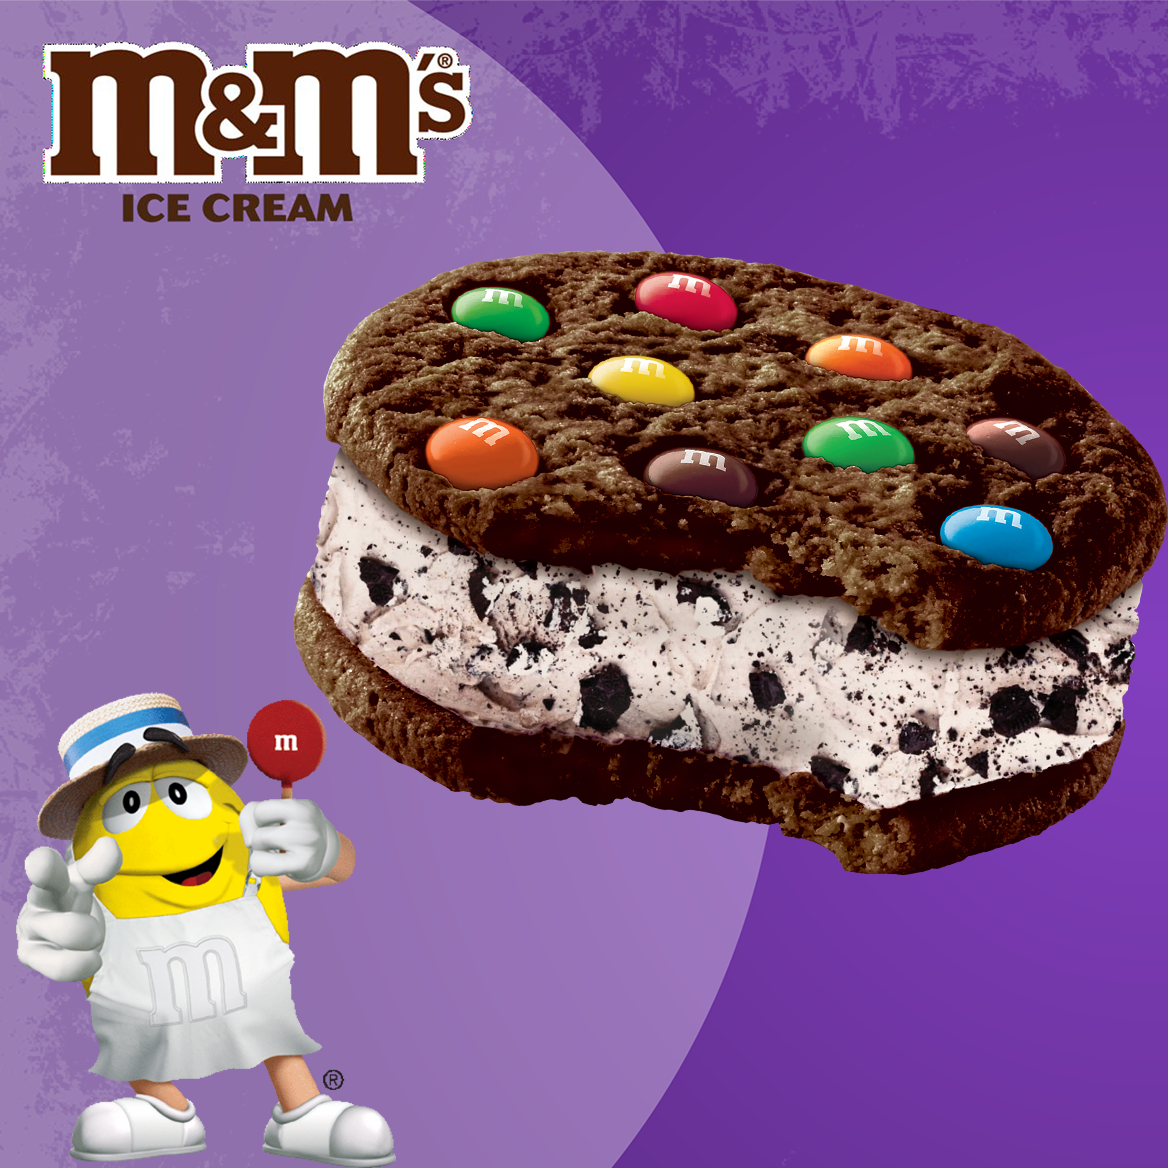 mars cookies and cream ice cream sandwich multipack or novelty from wholesale distributor transcold distribution